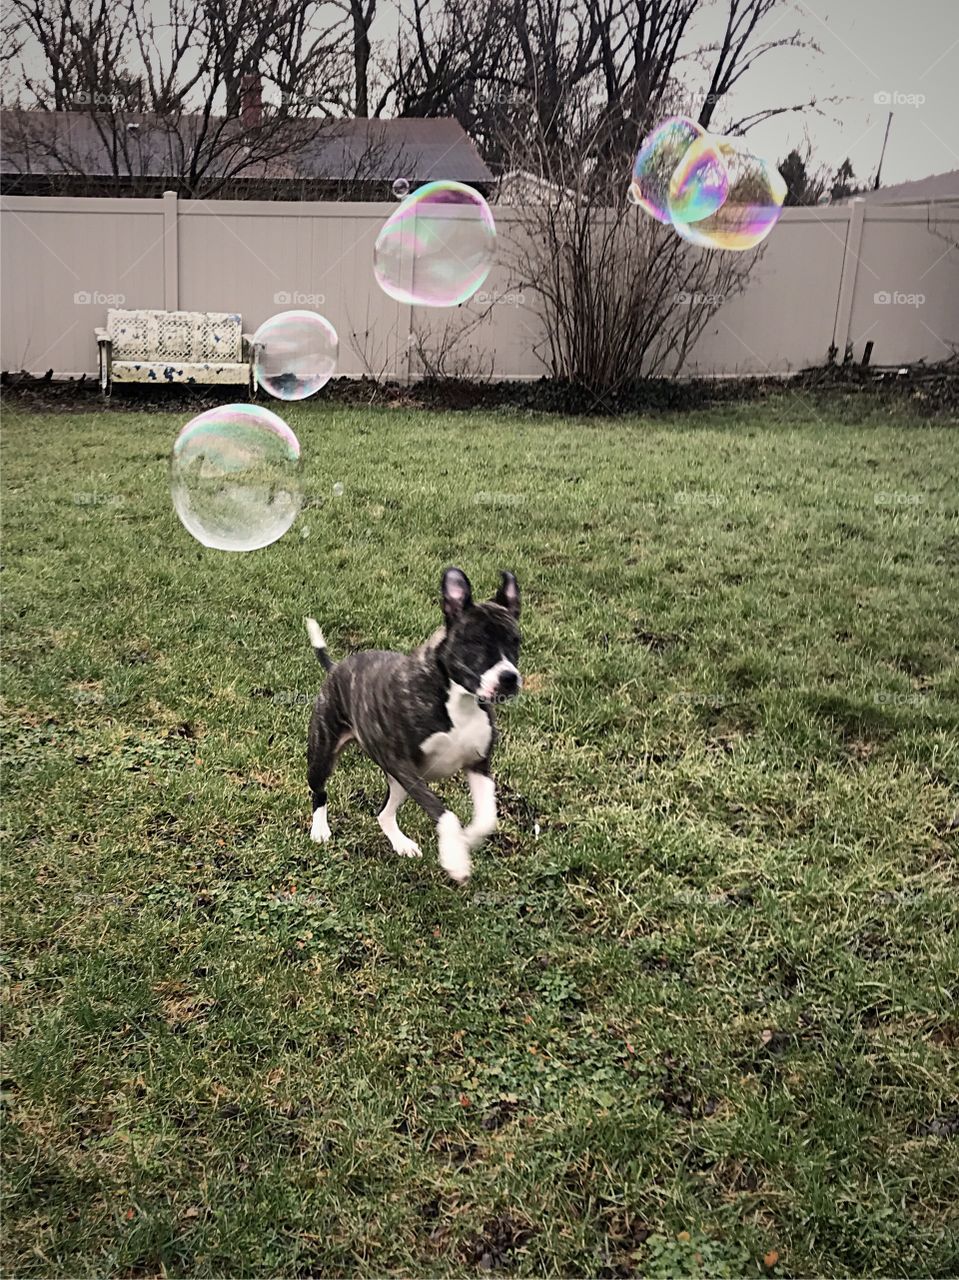 Pit bull chasing bubbles